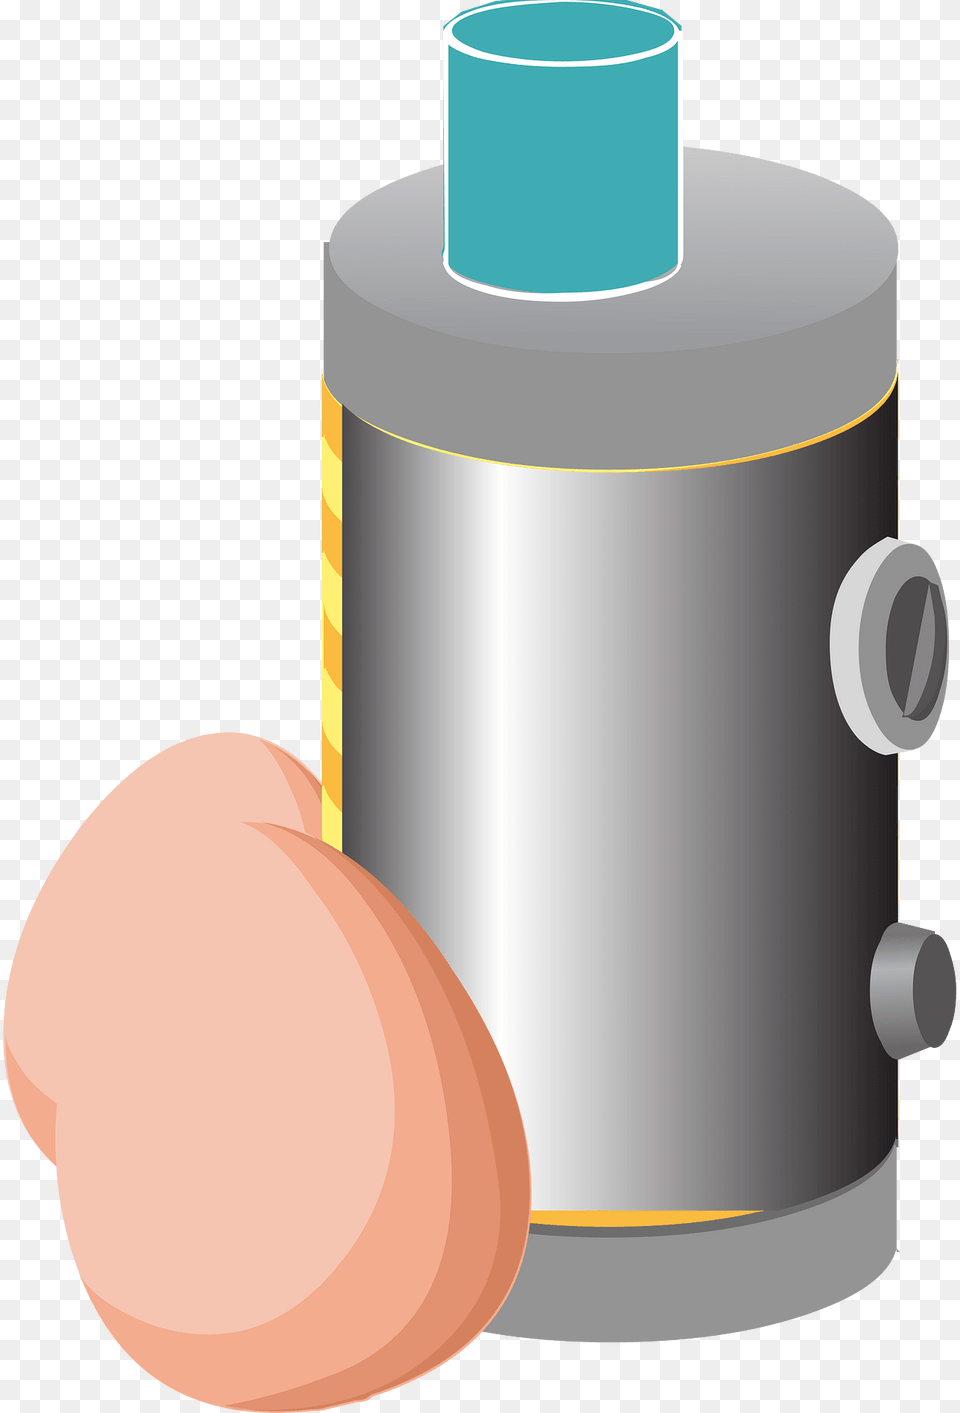 Silver Boiler And Two Pink Eggs Clipart, Bottle, Shaker Png Image